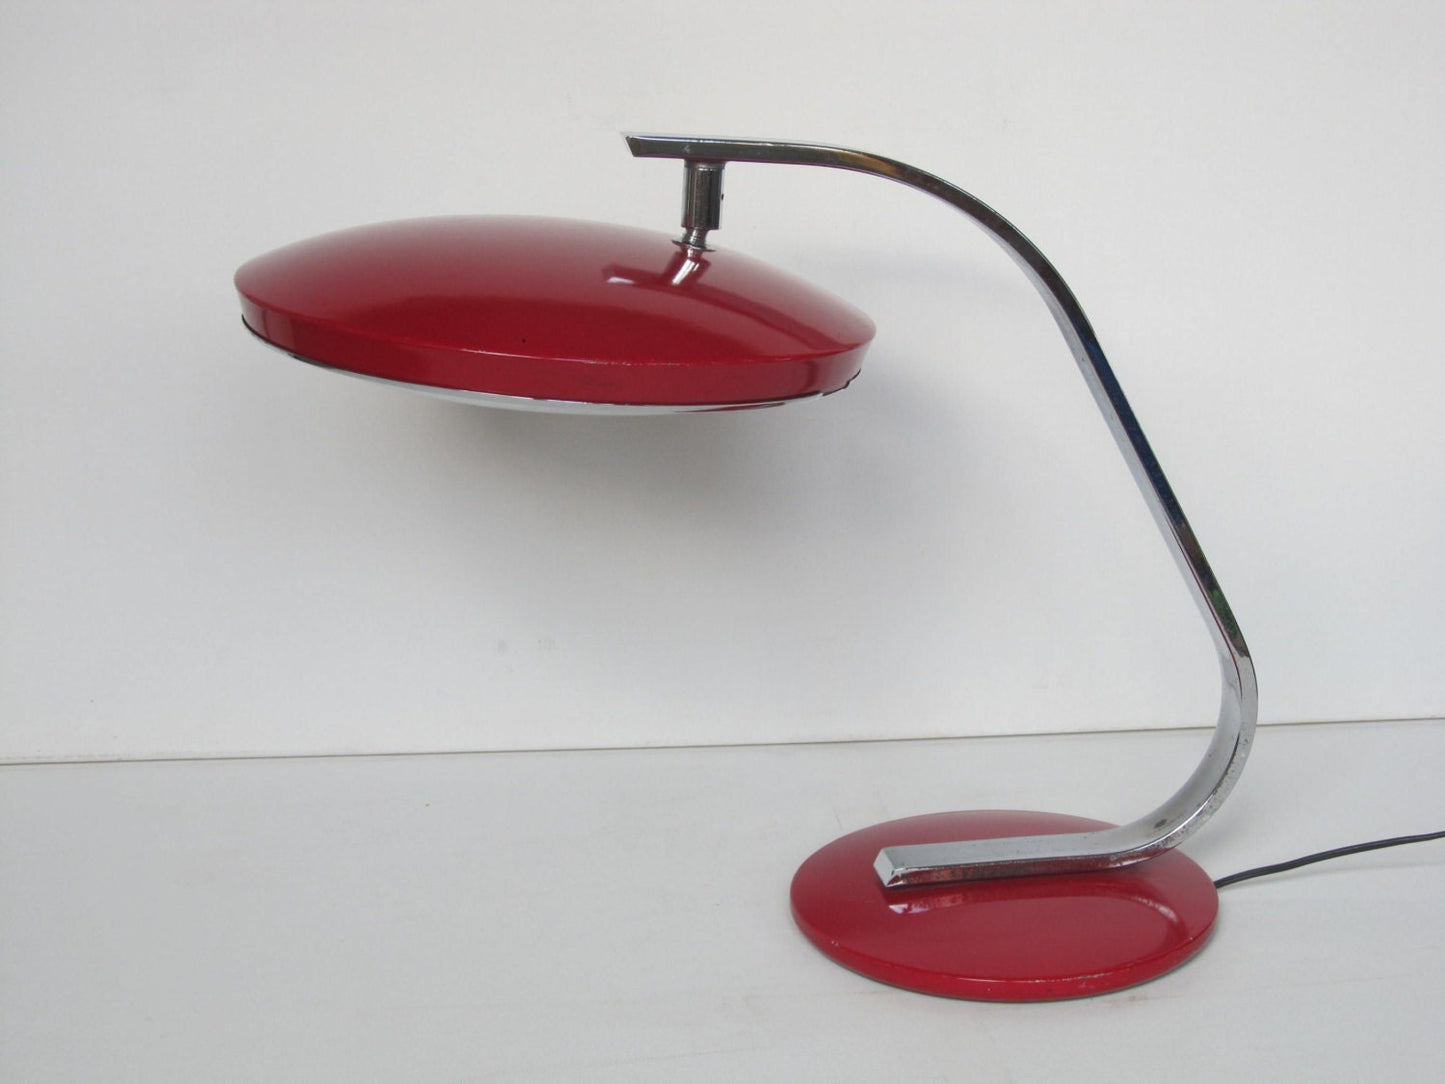 Fase Lamp Madrid space age Table or Desk Lamp, Spanish mid-century modernist lamp from the 1970s